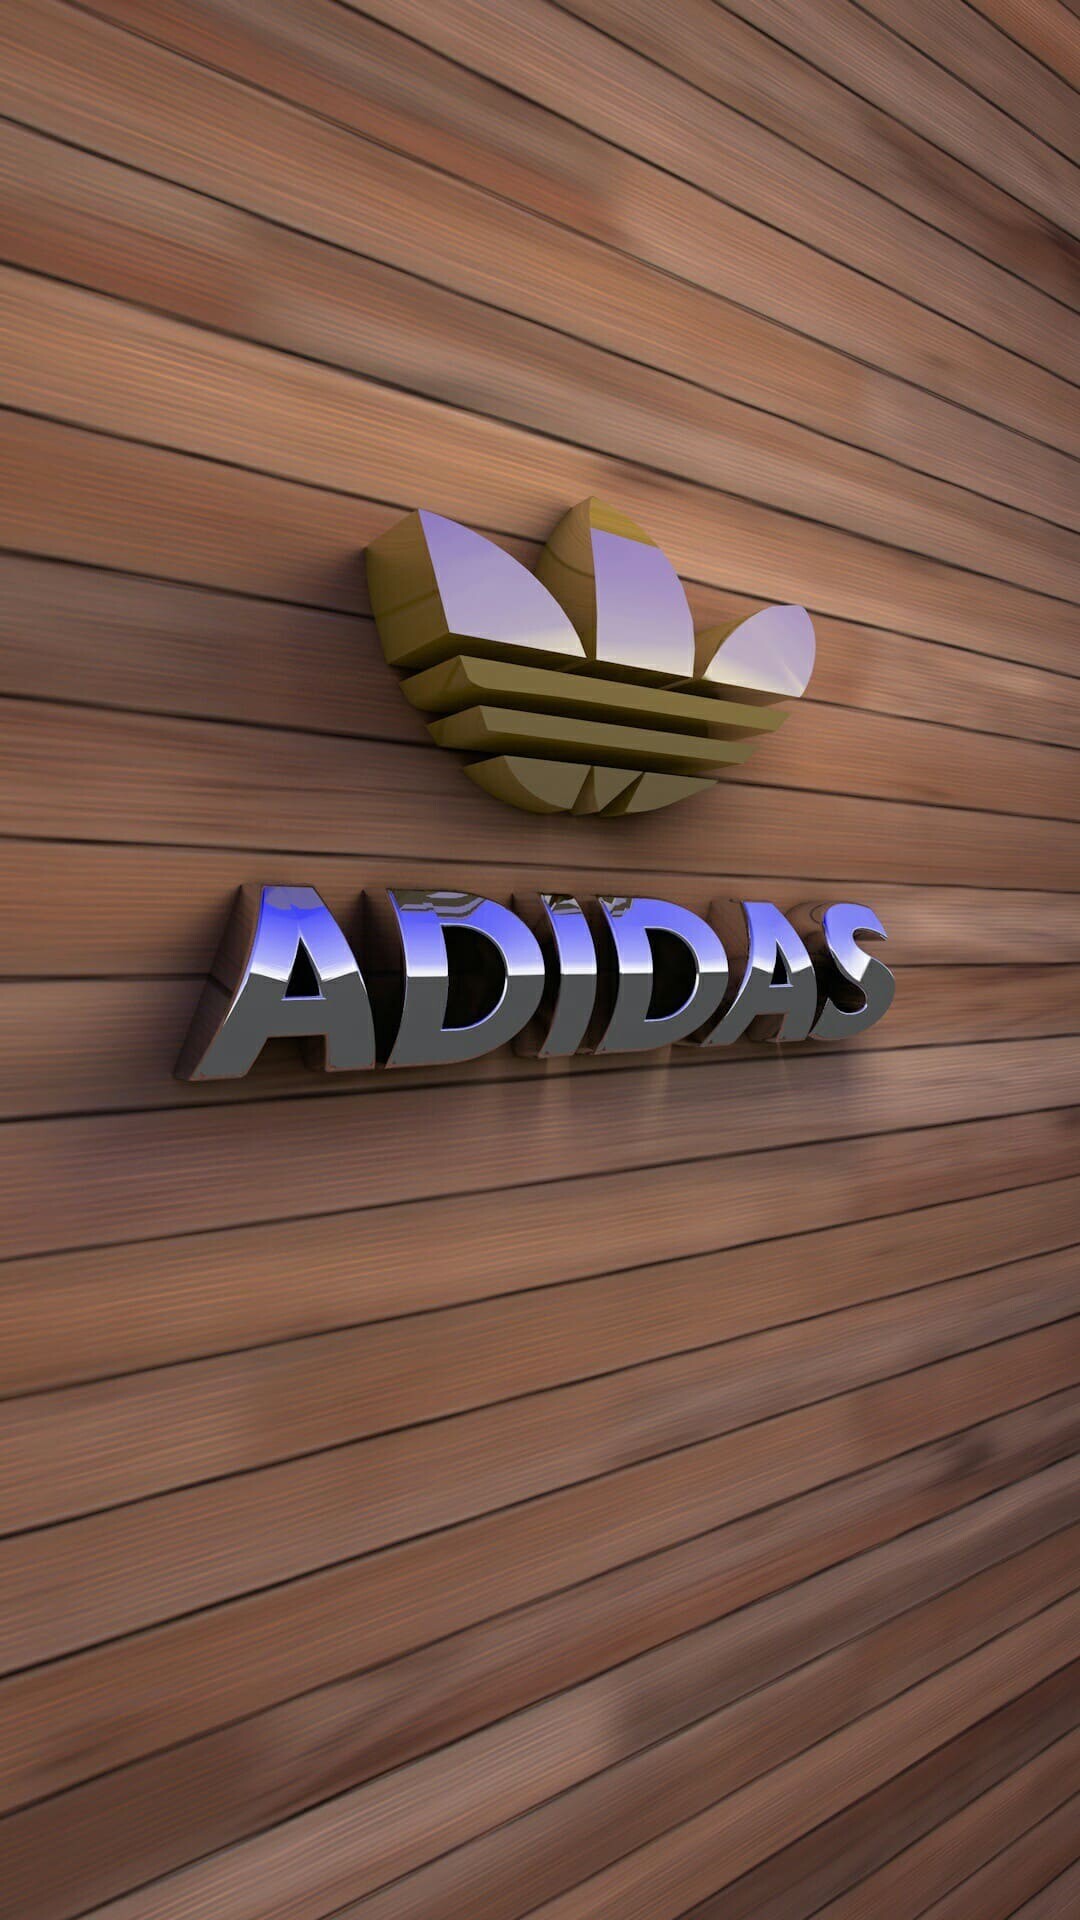 Adidas iPhone Wallpapers, Best 25 Adidas, iPhone Wallpaper, Backgrounds, 1080x1920 Full HD Phone